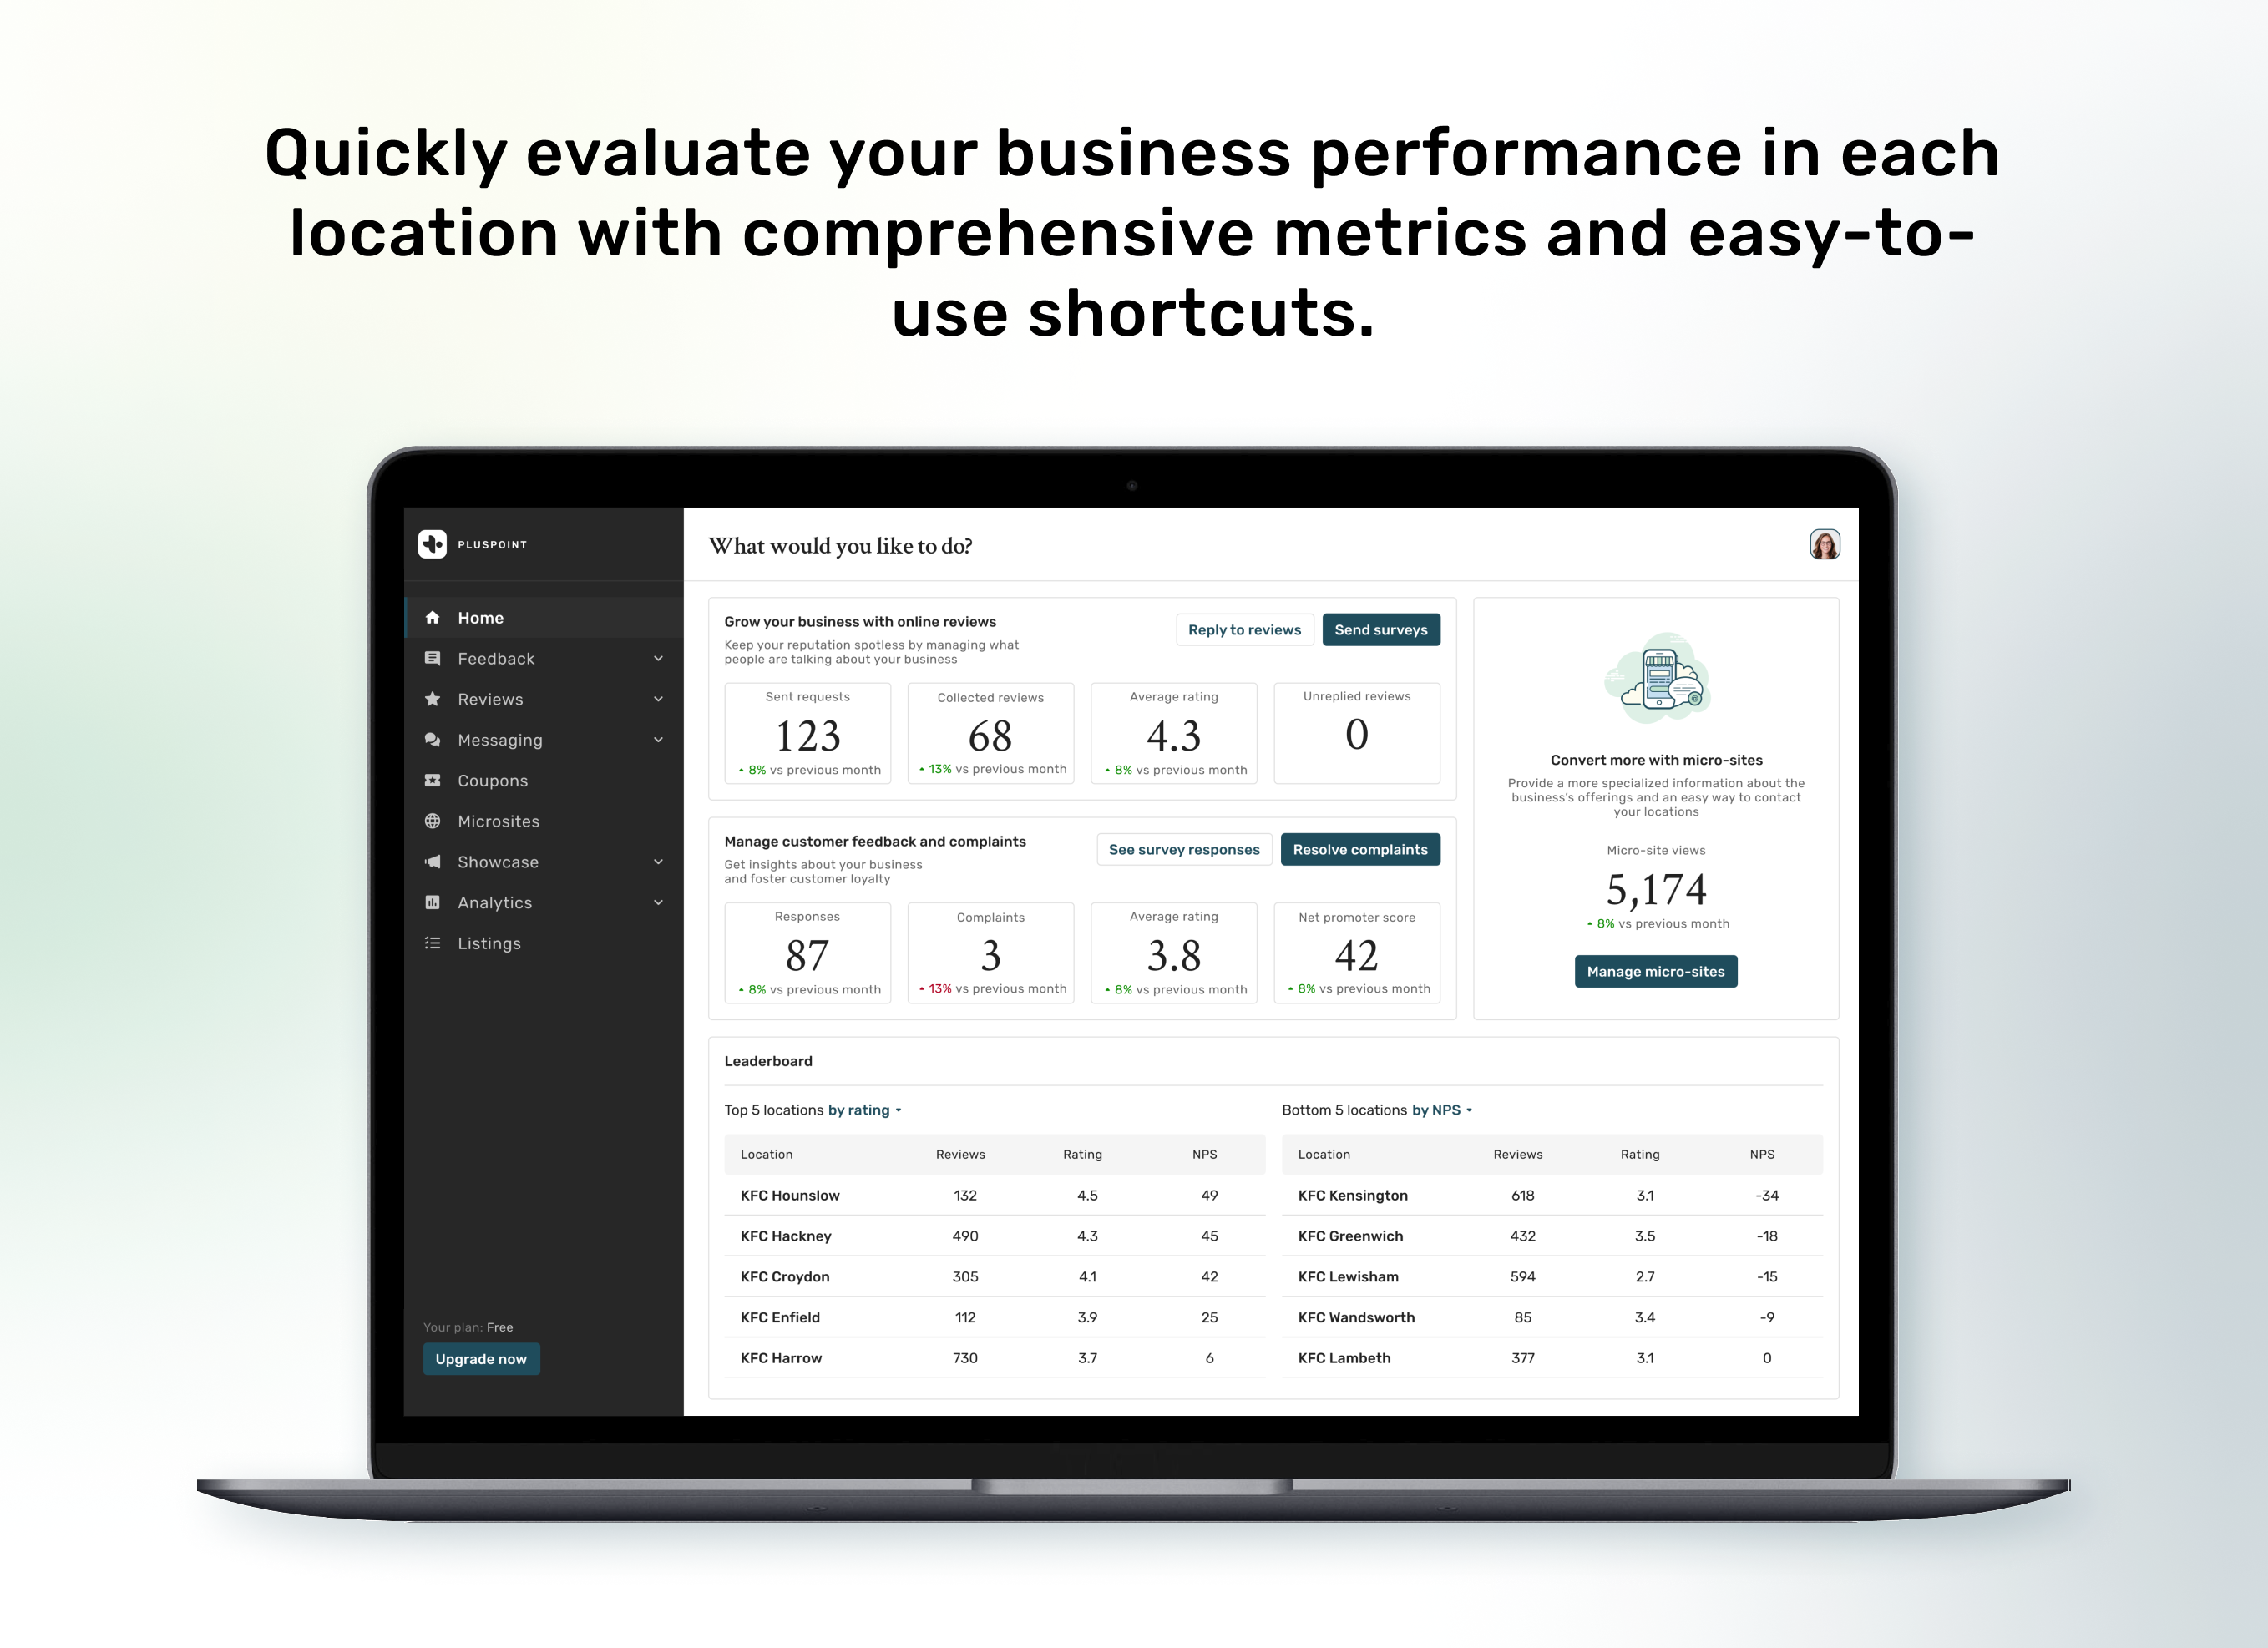 Featuring shortcuts and detailed metrics used to manage customer feedback, track a business's online reputation, and build customer loyalty.